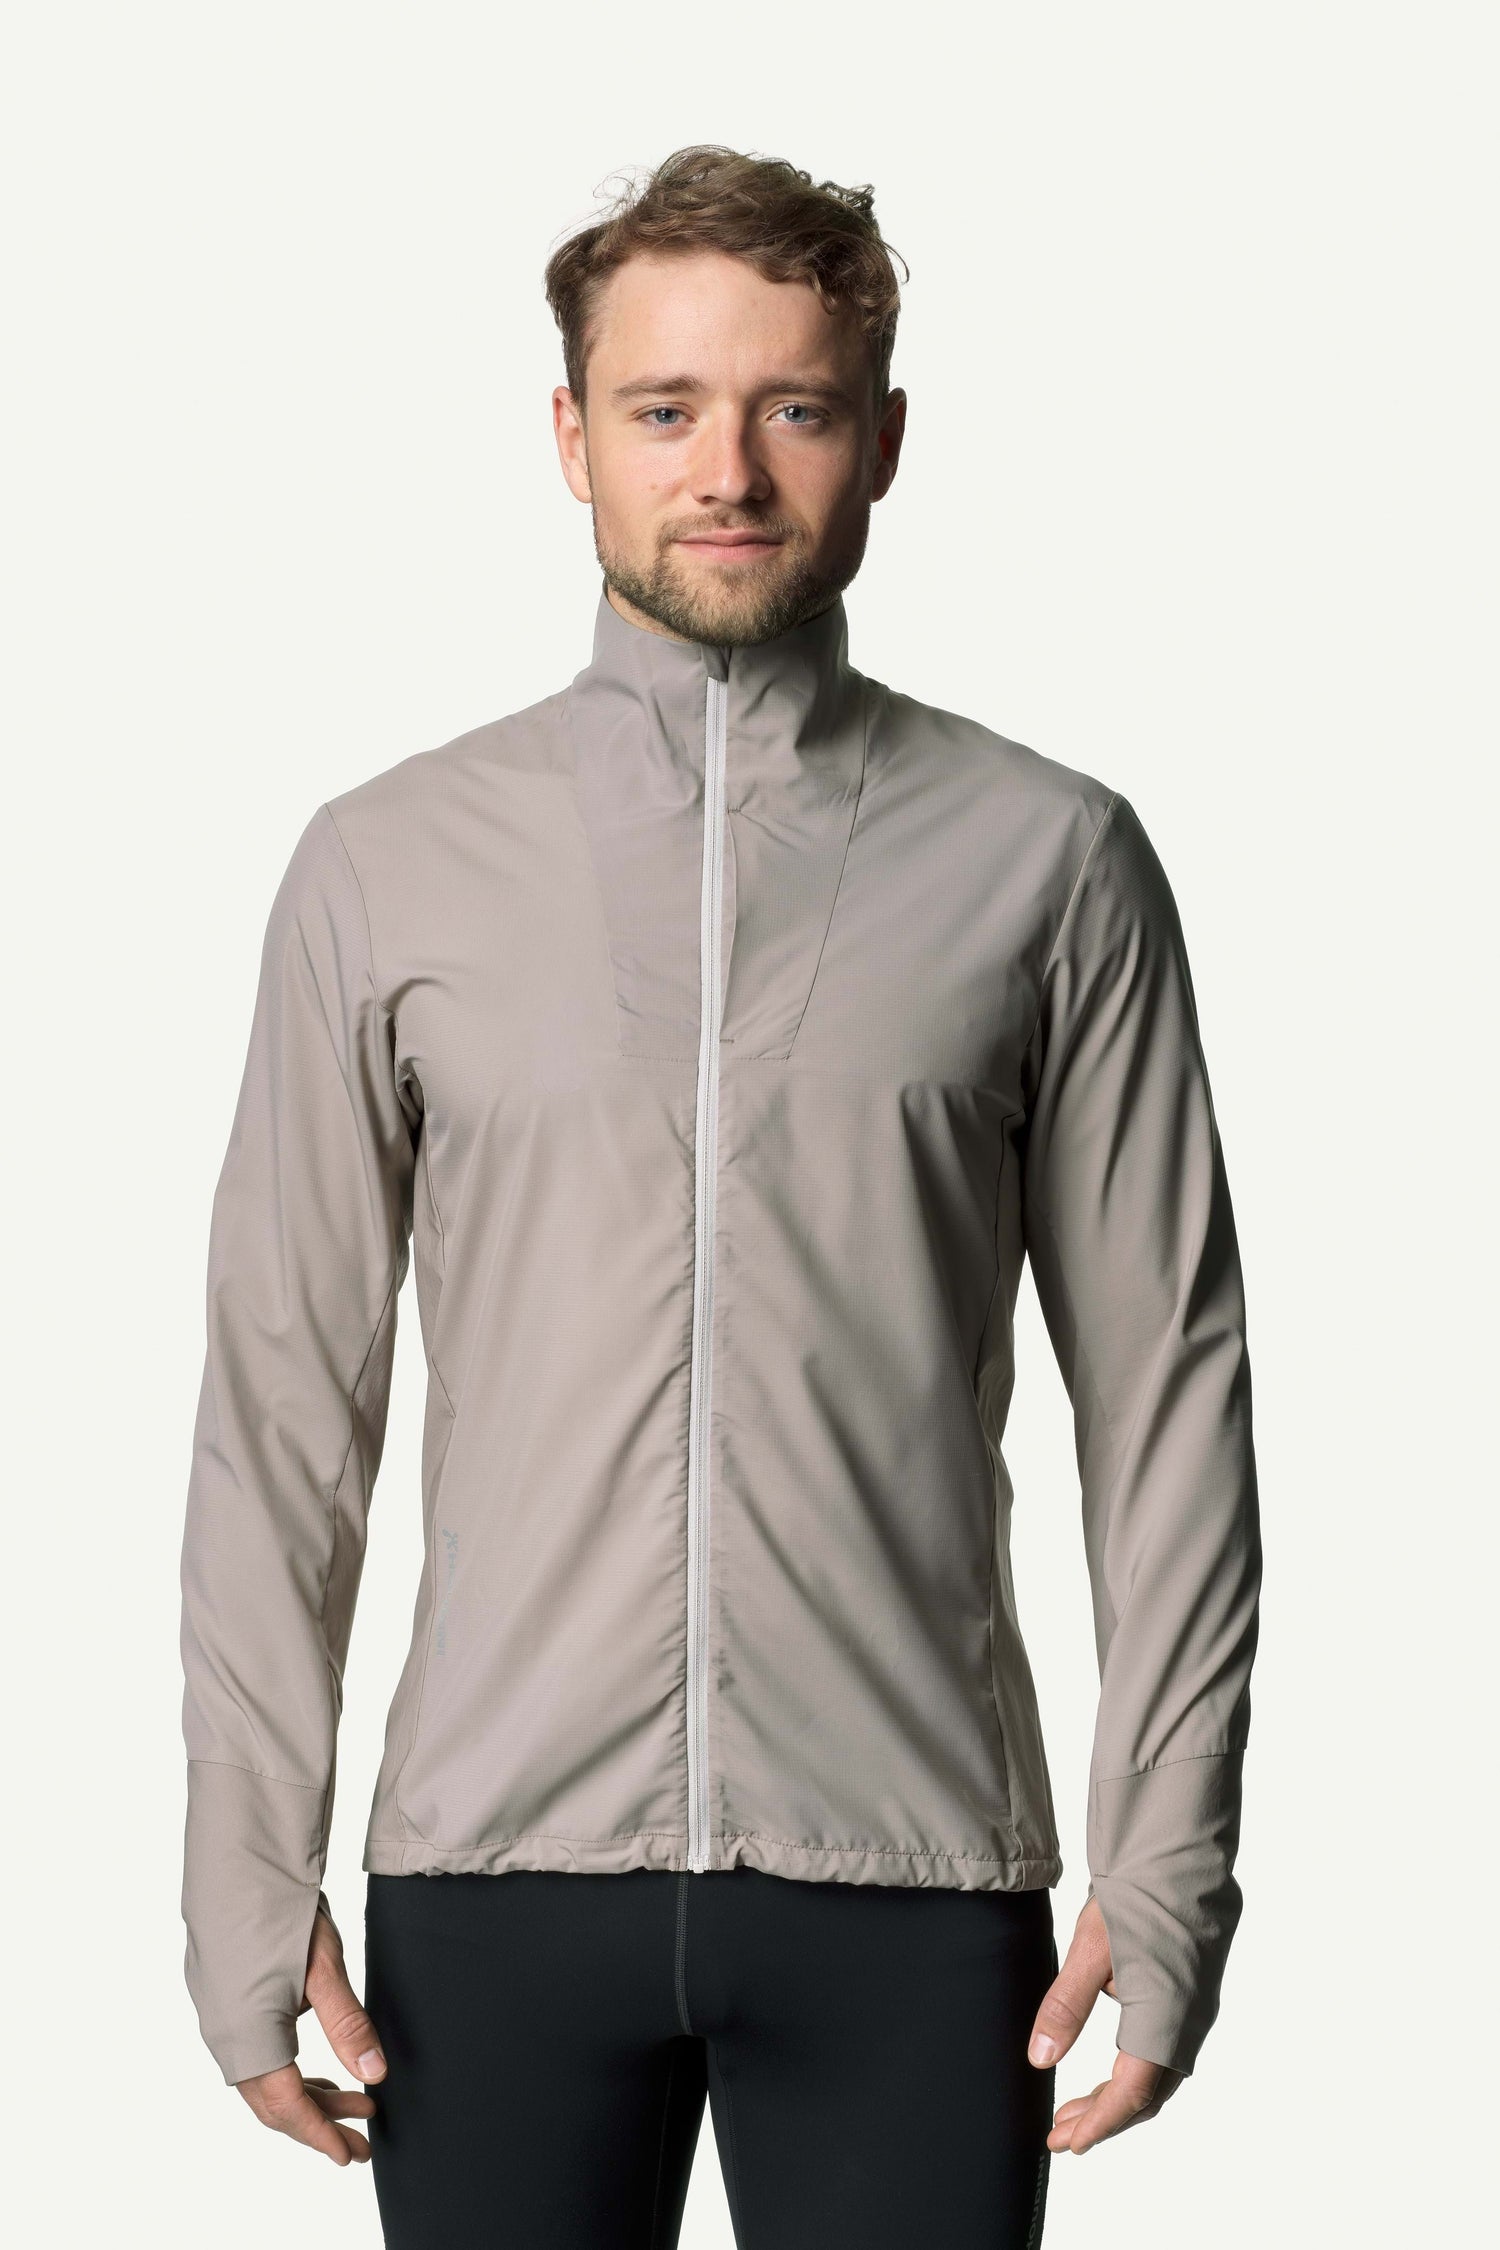 Houdini - M's Pace Wind Jacket - 100% recycled polyester - Weekendbee - sustainable sportswear